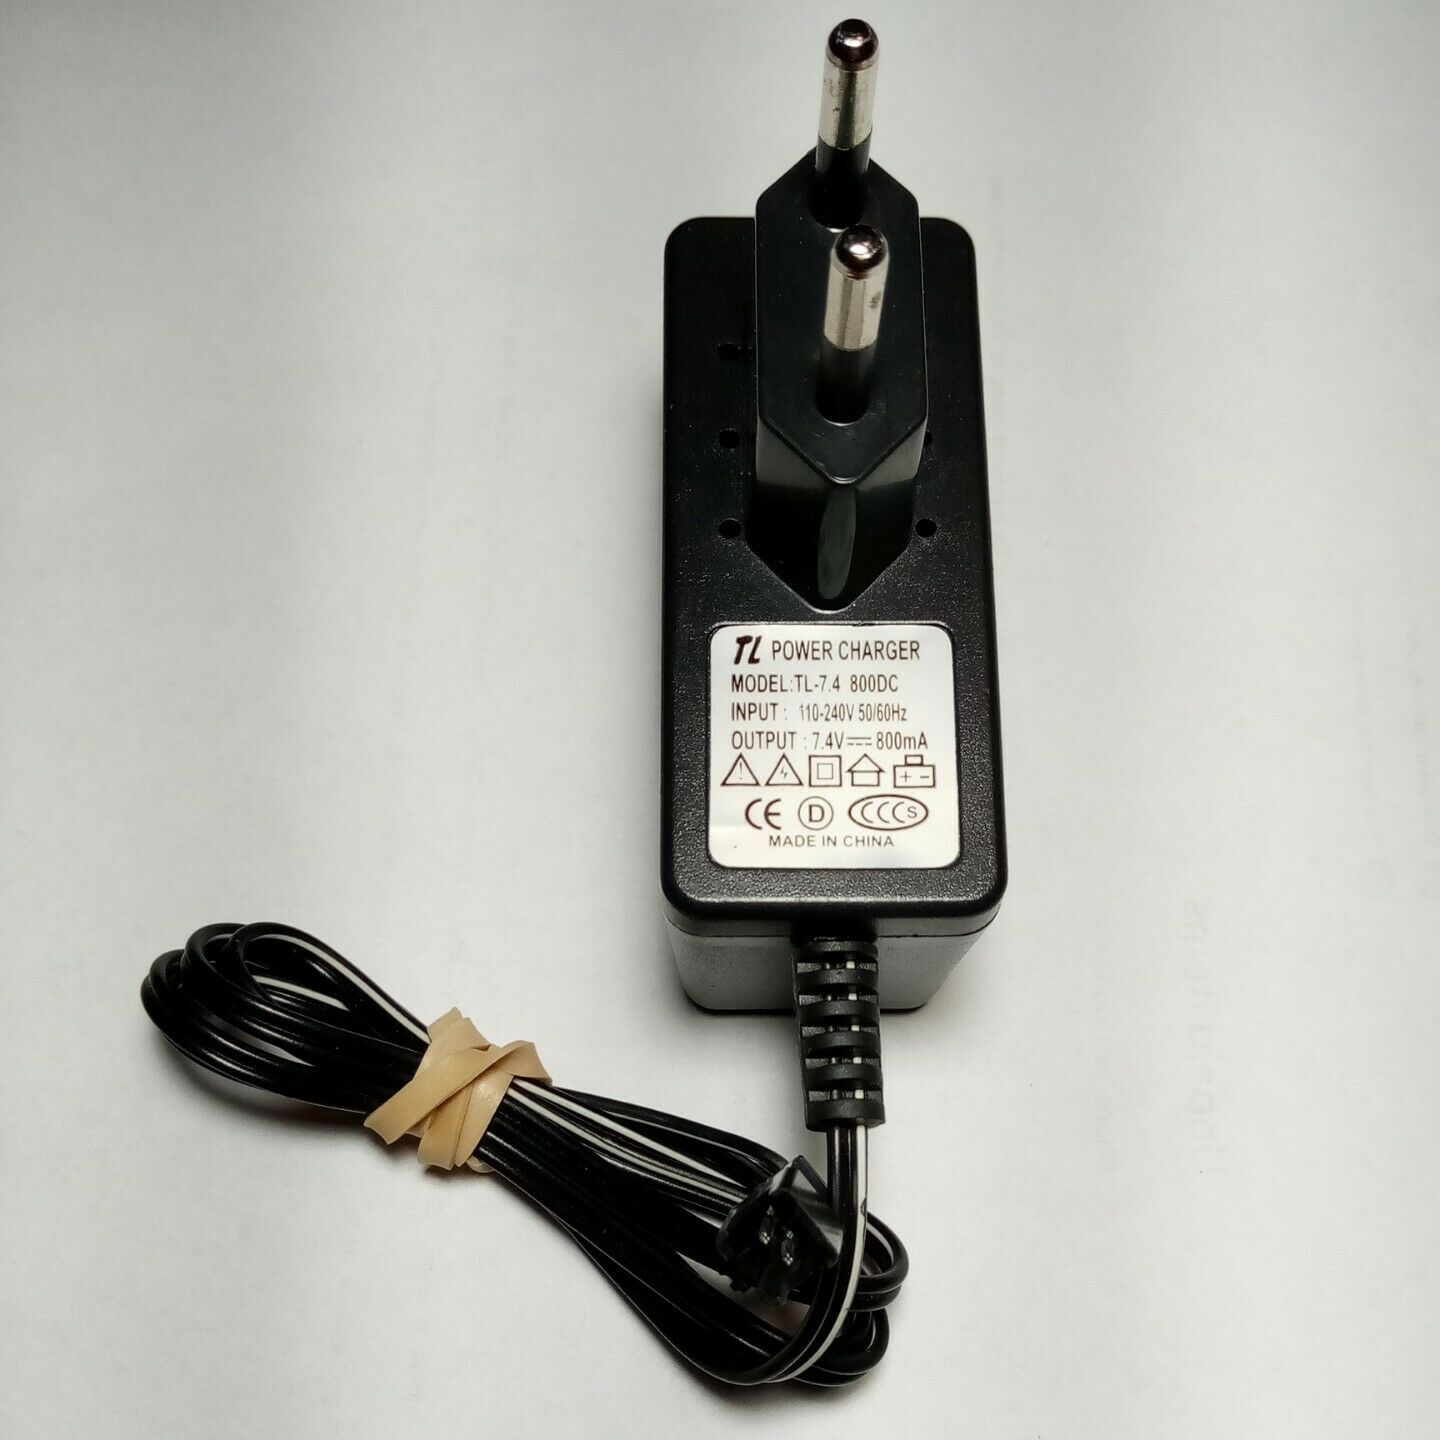 OEM TL Power Supply 7.4V 800mA Brand: TL Type: DC Features: new Output Voltage: 7.4 V TL Power Supply 7.4V 800mA